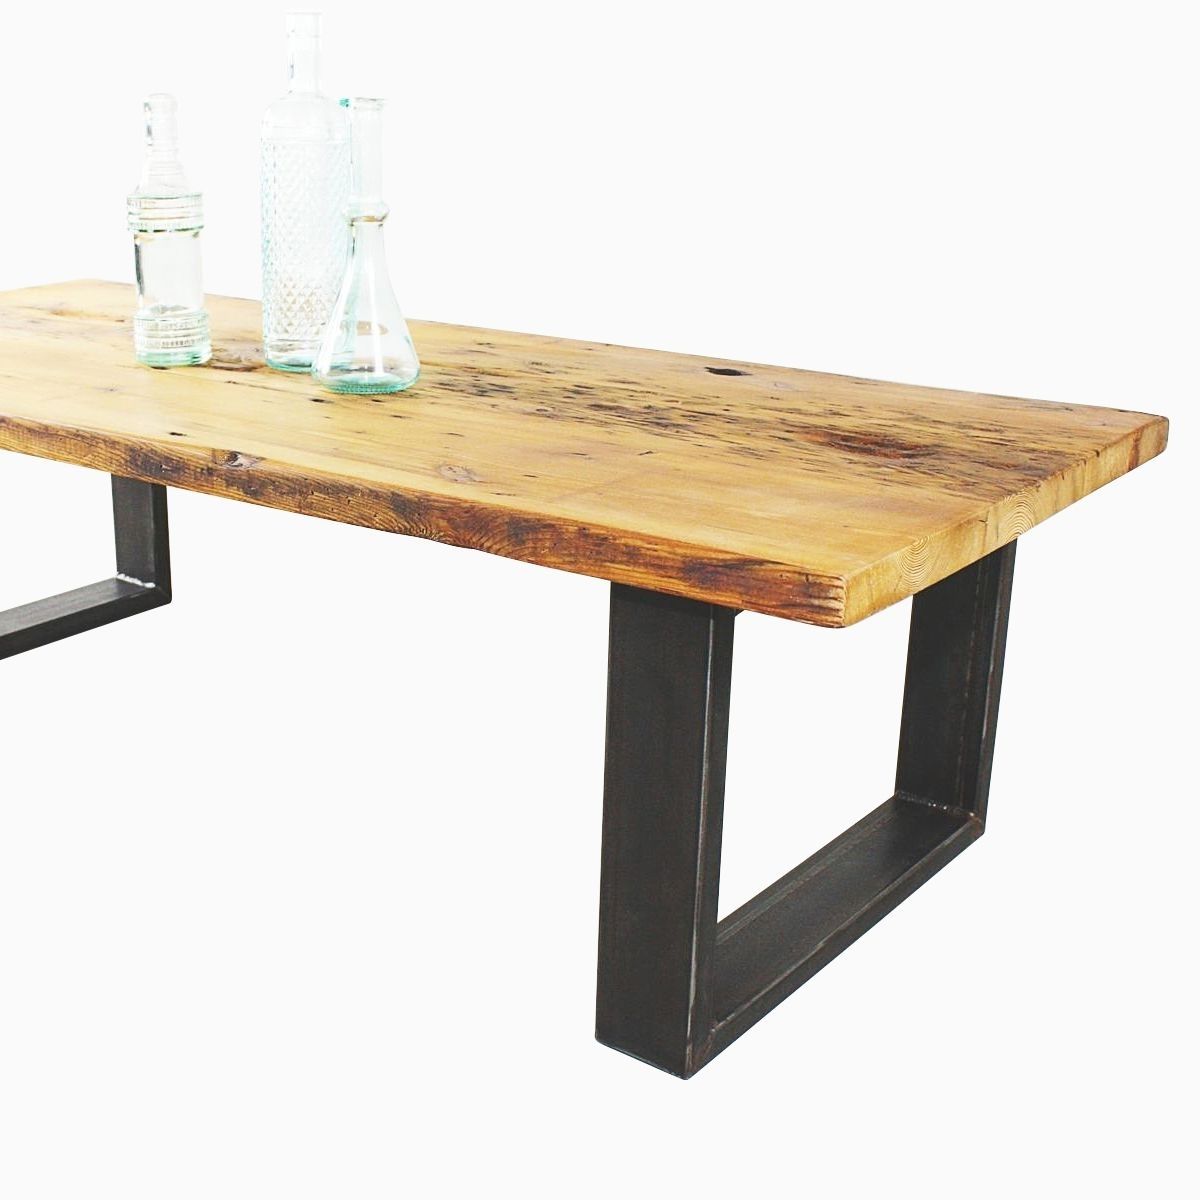 Buy A Hand Made Reclaimed Pine Coffee Table, Made To Order From What With Regard To Most Up To Date Reclaimed Pine Coffee Tables (View 1 of 20)